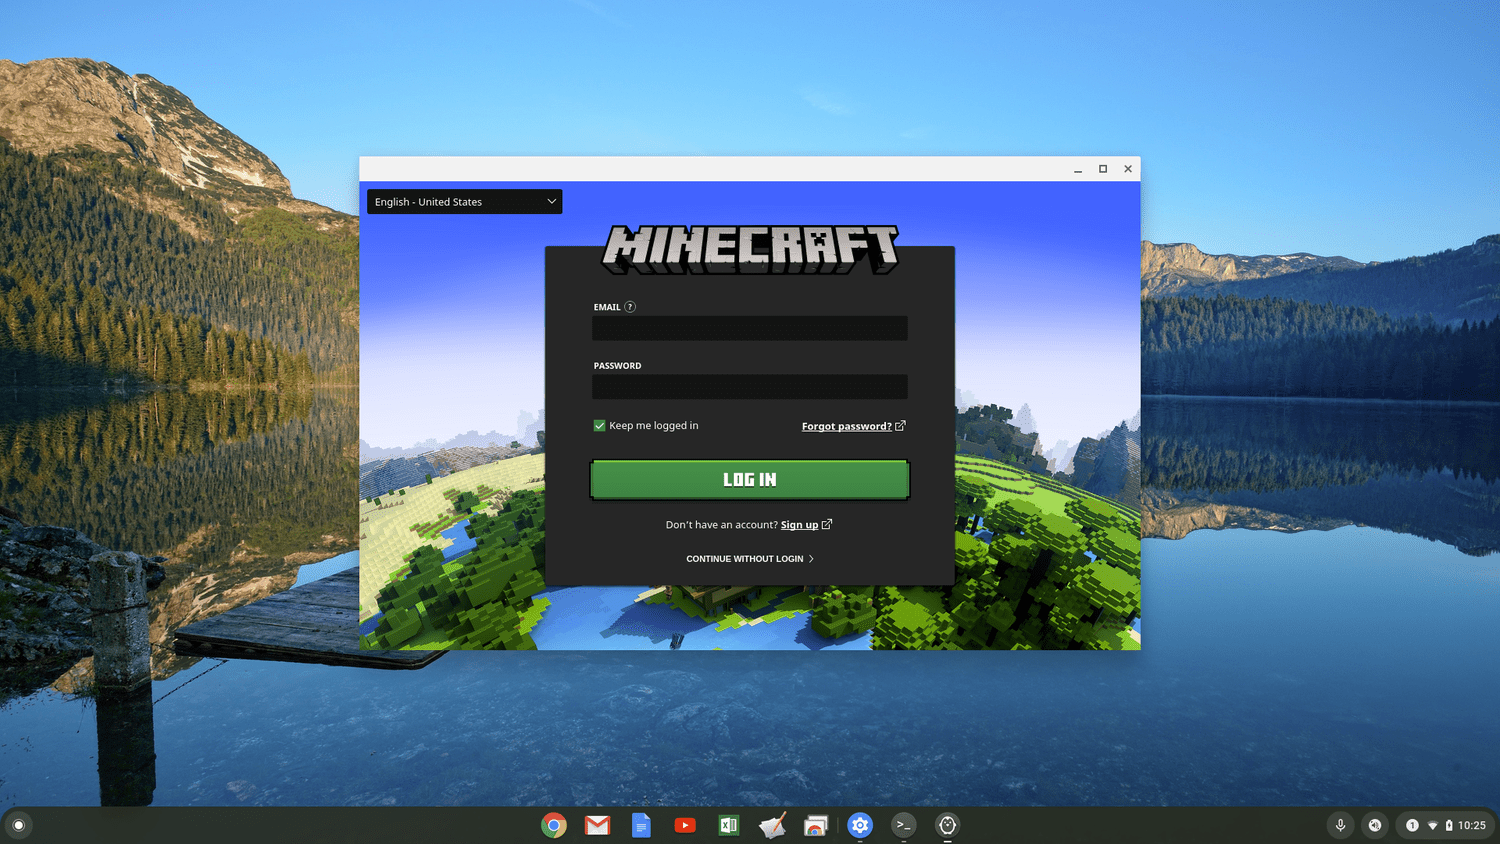 Minecraft: Bedrock Edition is officially available on Chromebooks